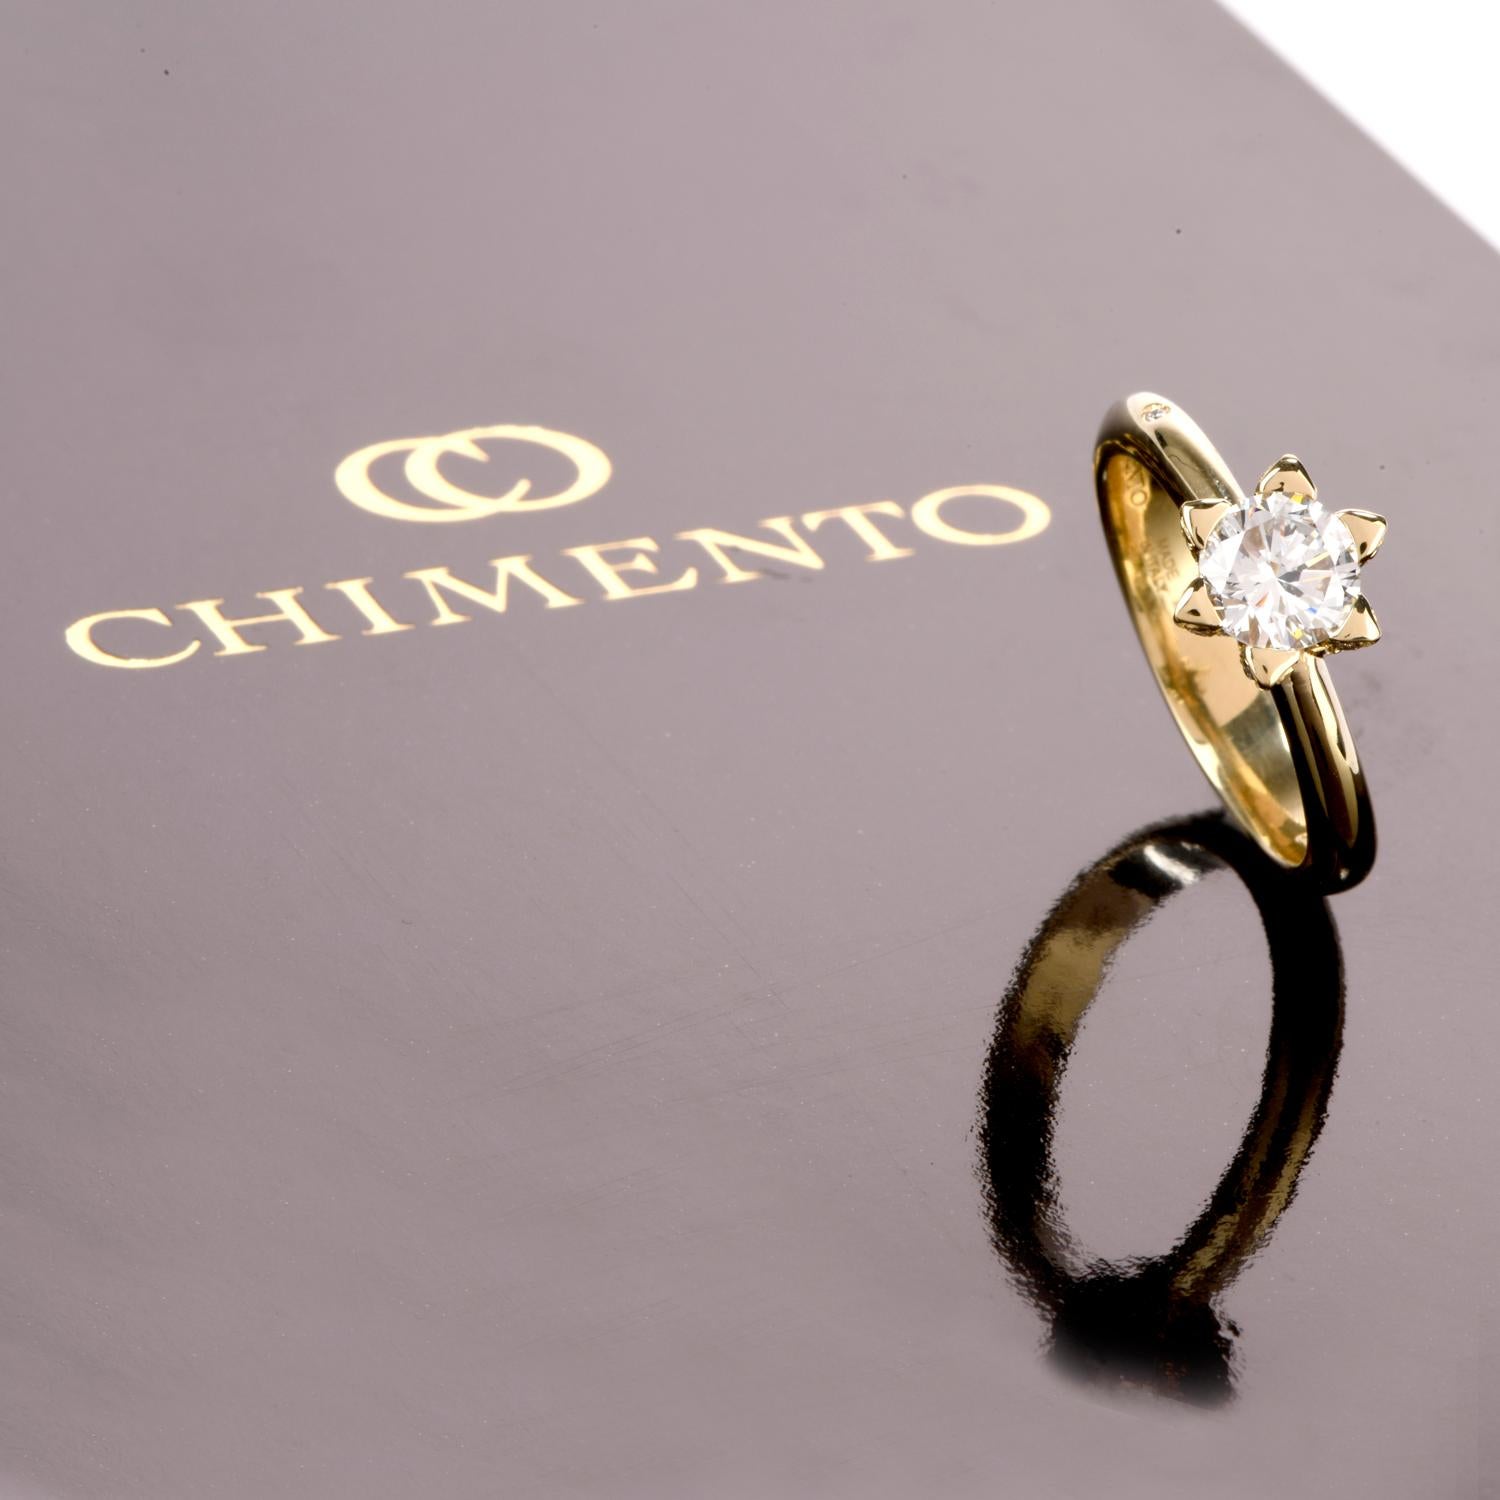 This elegant Contemporary Chimento Solitaire Engagement ring  was crafted in 18K yellow Gold. The Chimento brand epitomizes the age-old Italian goldsmith and fine jewelry tradition through their unique and exclusive creations.  With a perfect